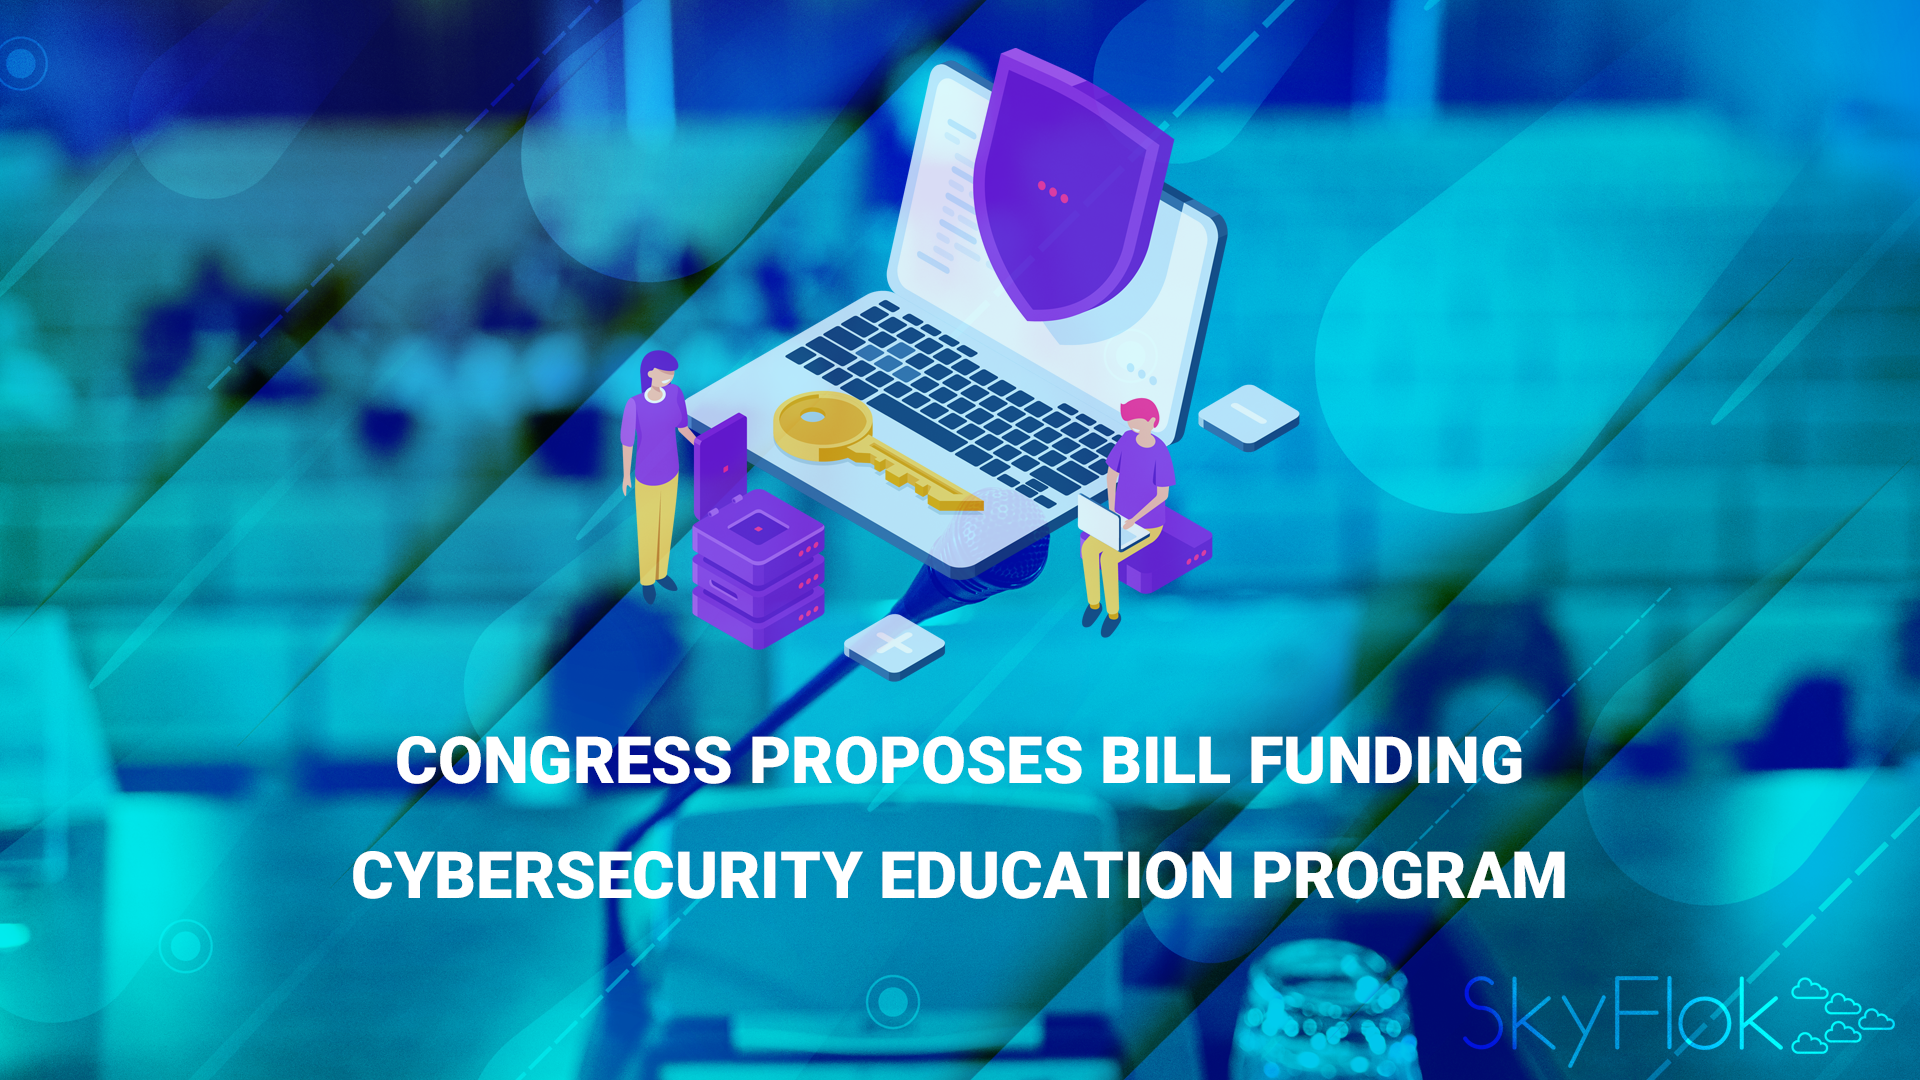 Congress Proposes Bill Funding Cybersecurity Education Program